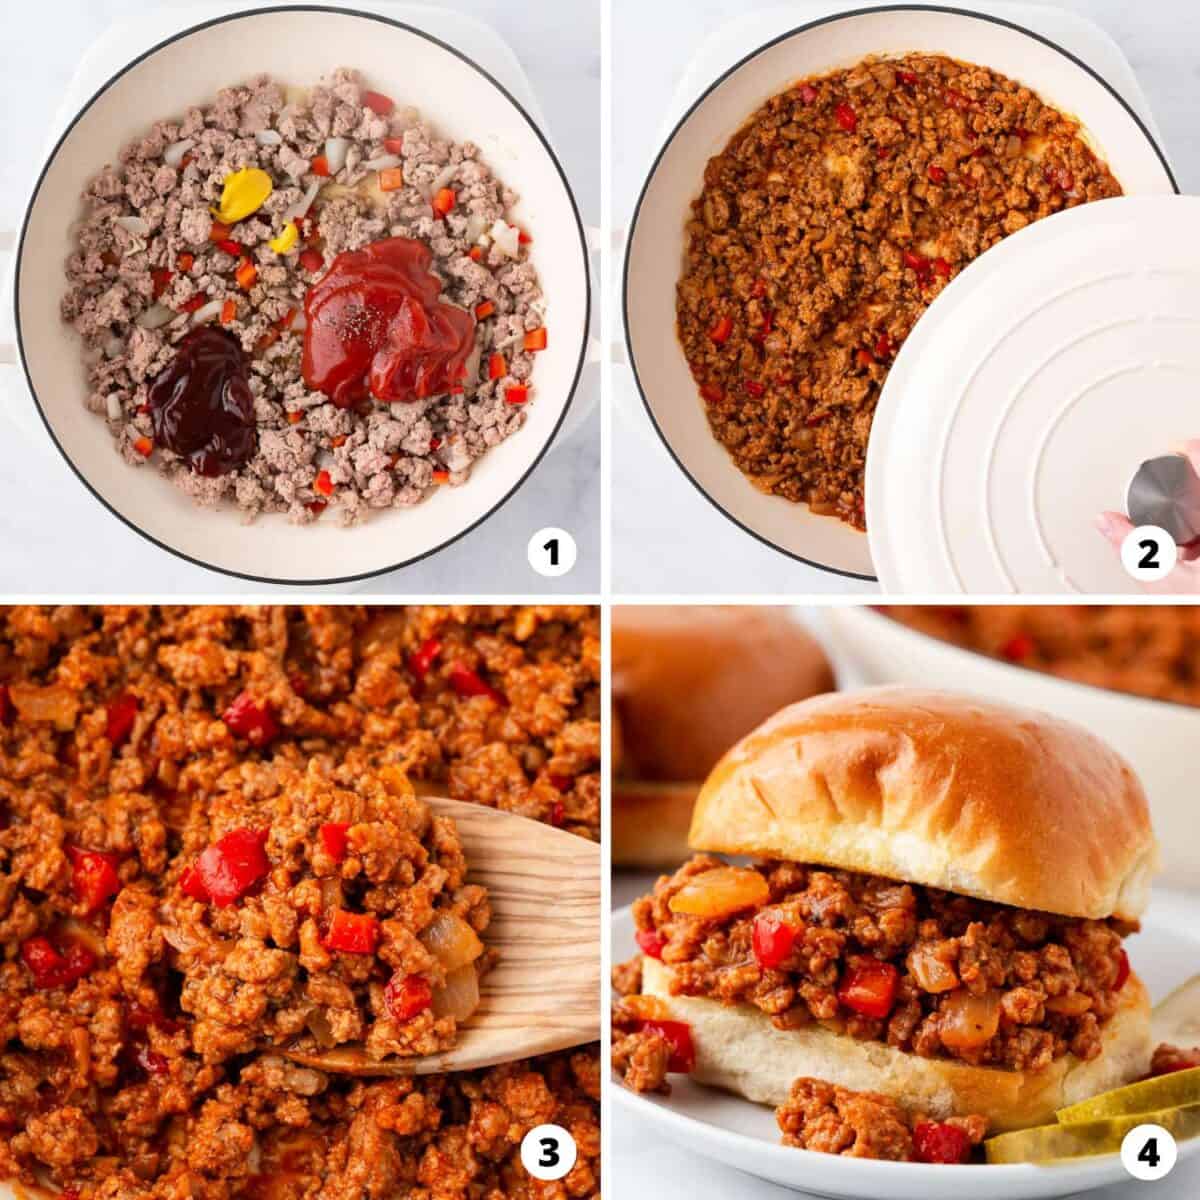 Showing how to make turkey sloppy joes in a 4 step collage.